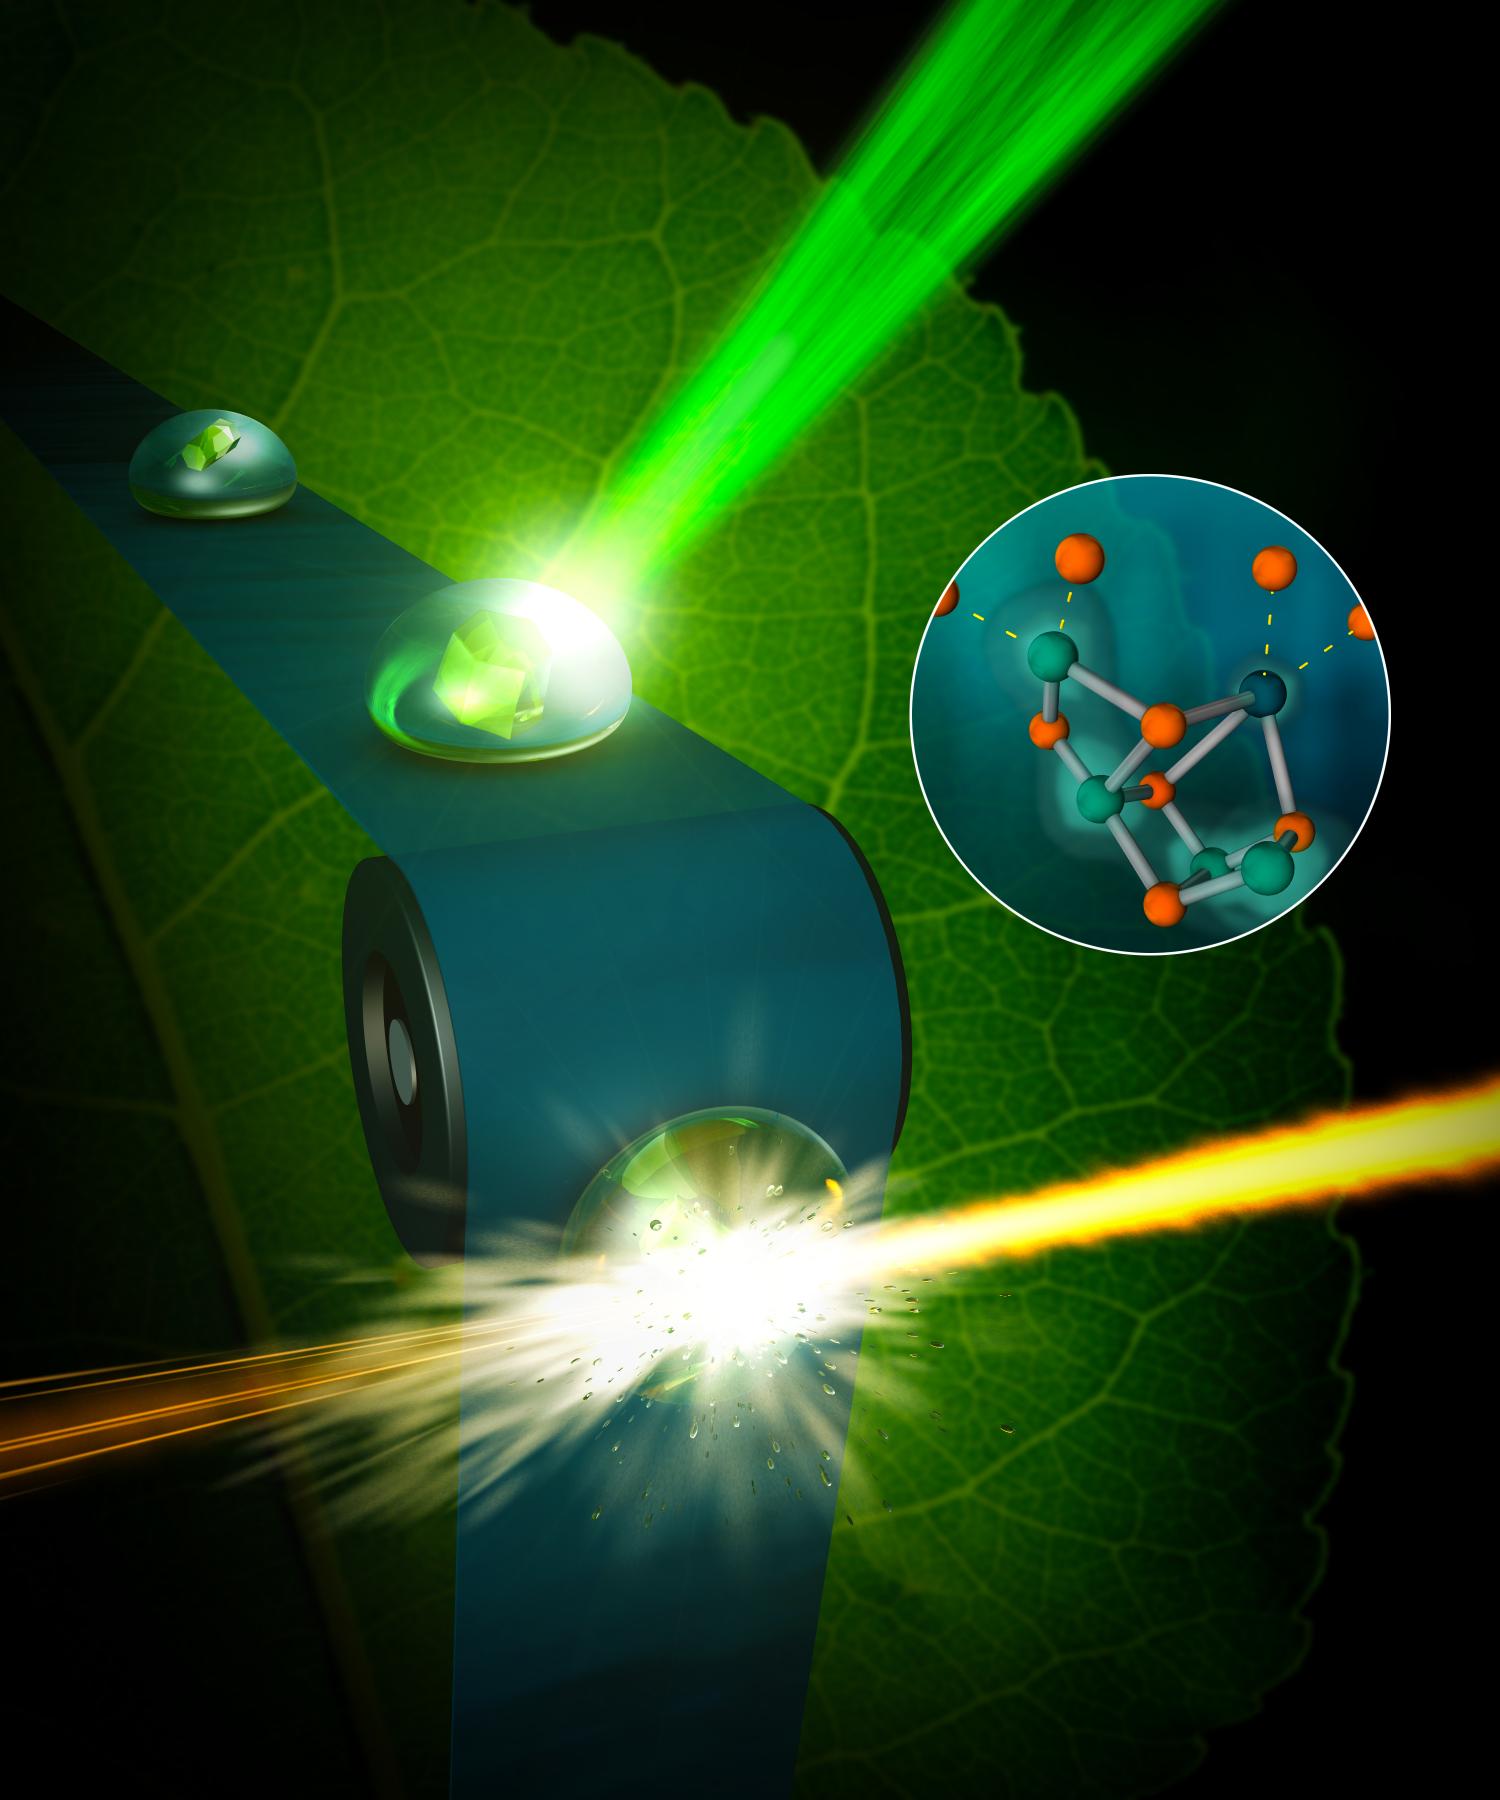 A femtosecond X-ray pulse from an X-ray free electron laser intersecting a droplet that contains photosystem II crystals, the protein extracted and crystallized from cyanobacteria. Credit: SLAC National Accelerator Laboratory Read more at: http://phys.org/news/2016-11-oxygen.html#jCp